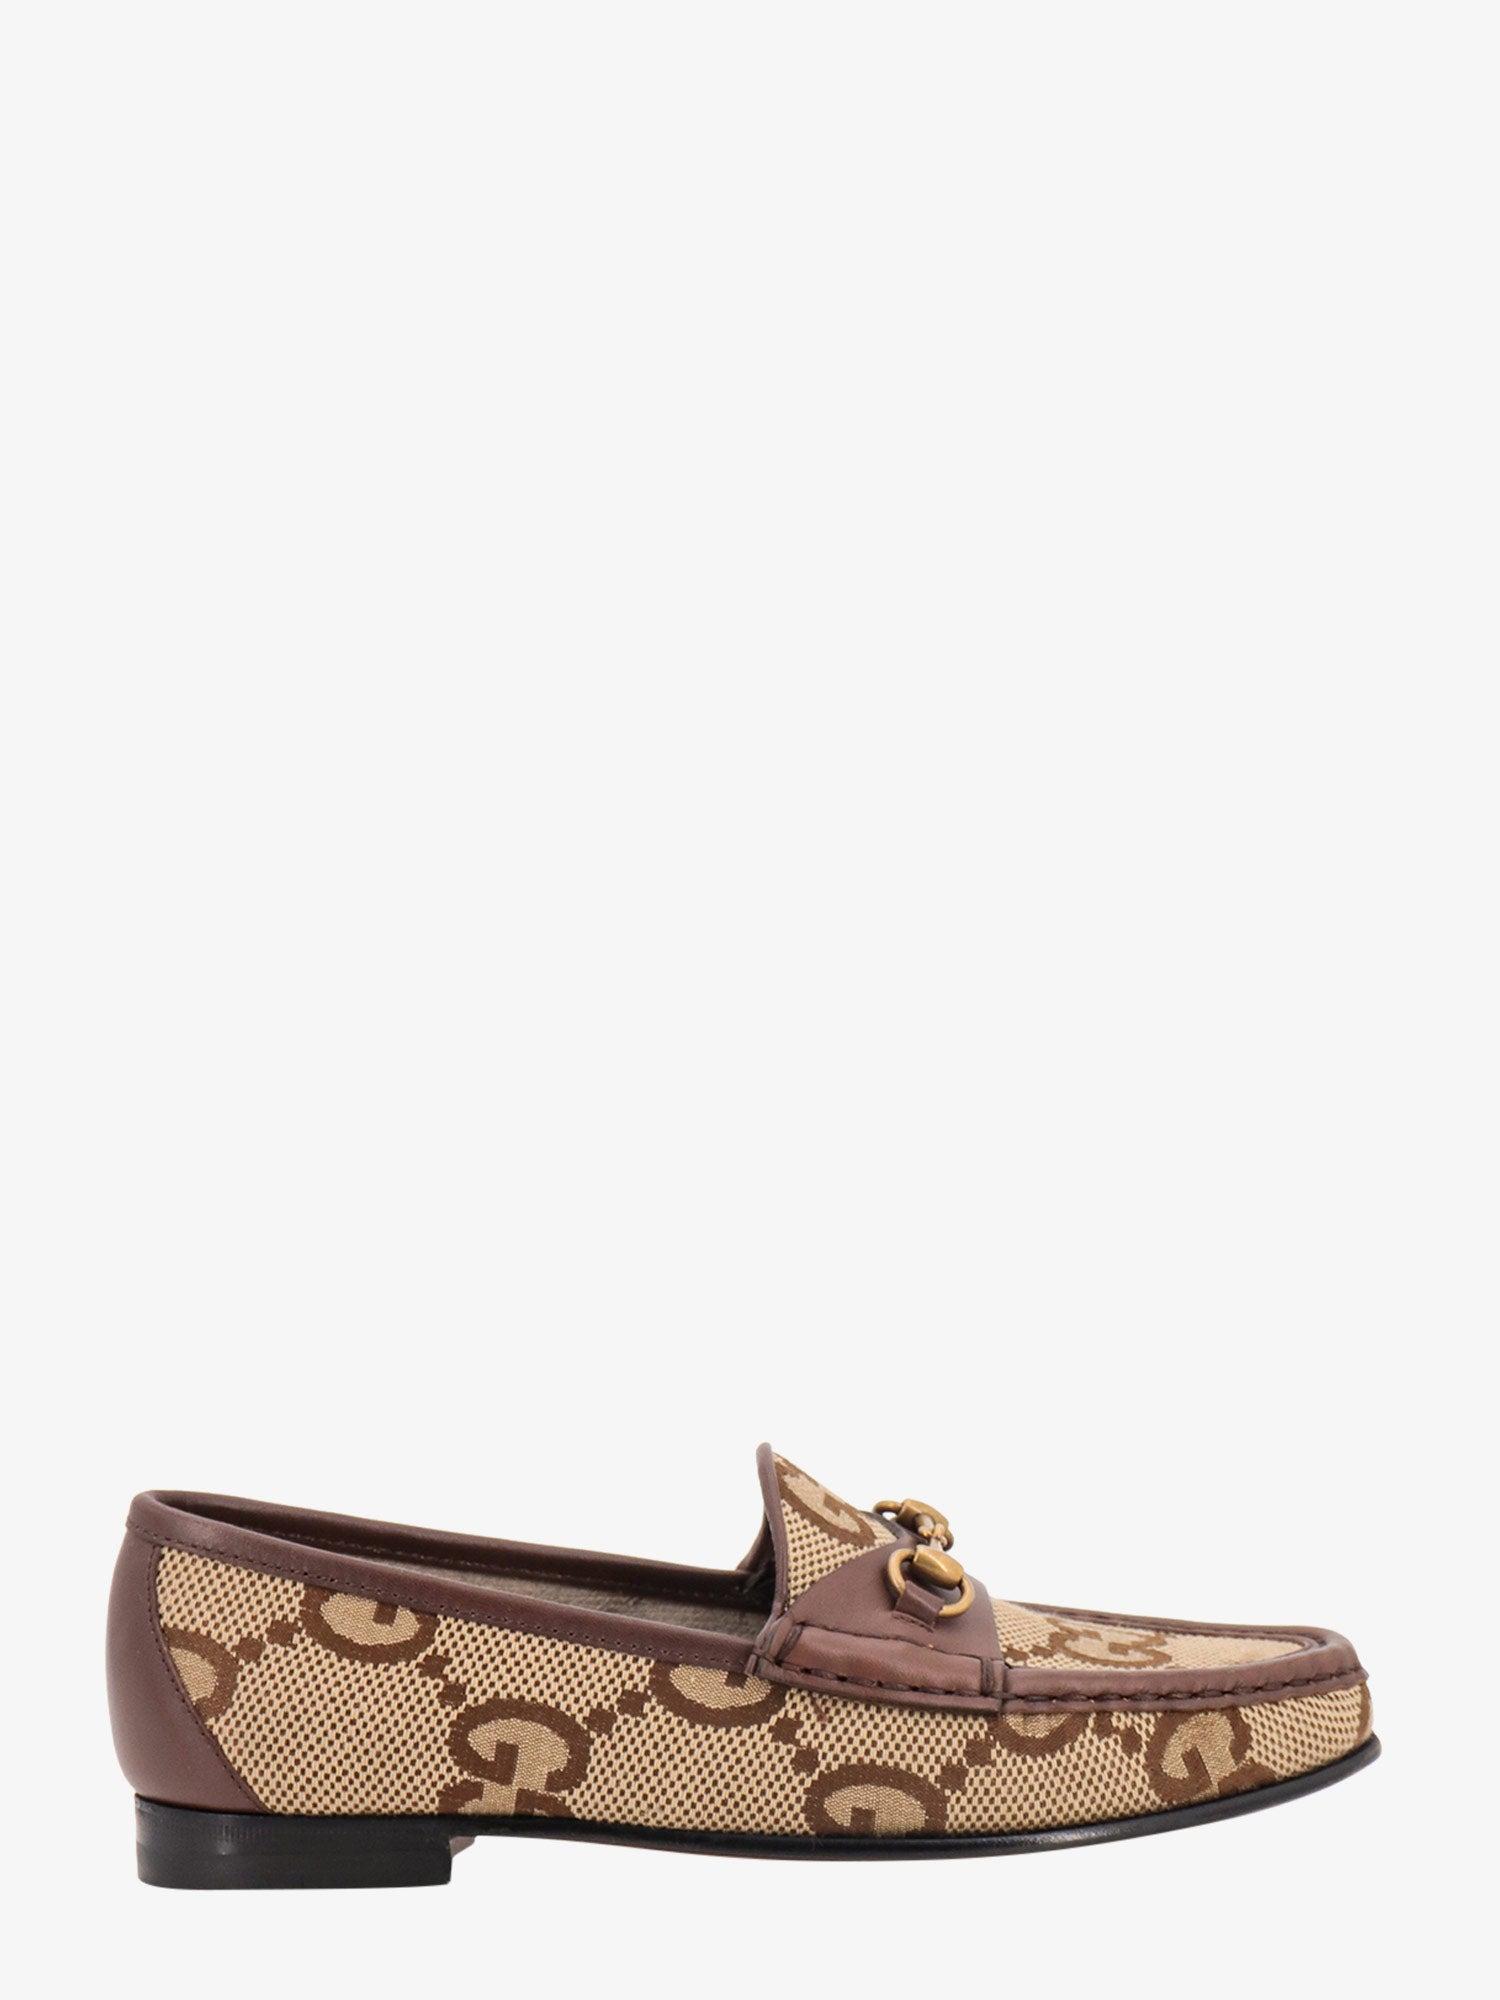 Gucci Loafer in Brown | Lyst